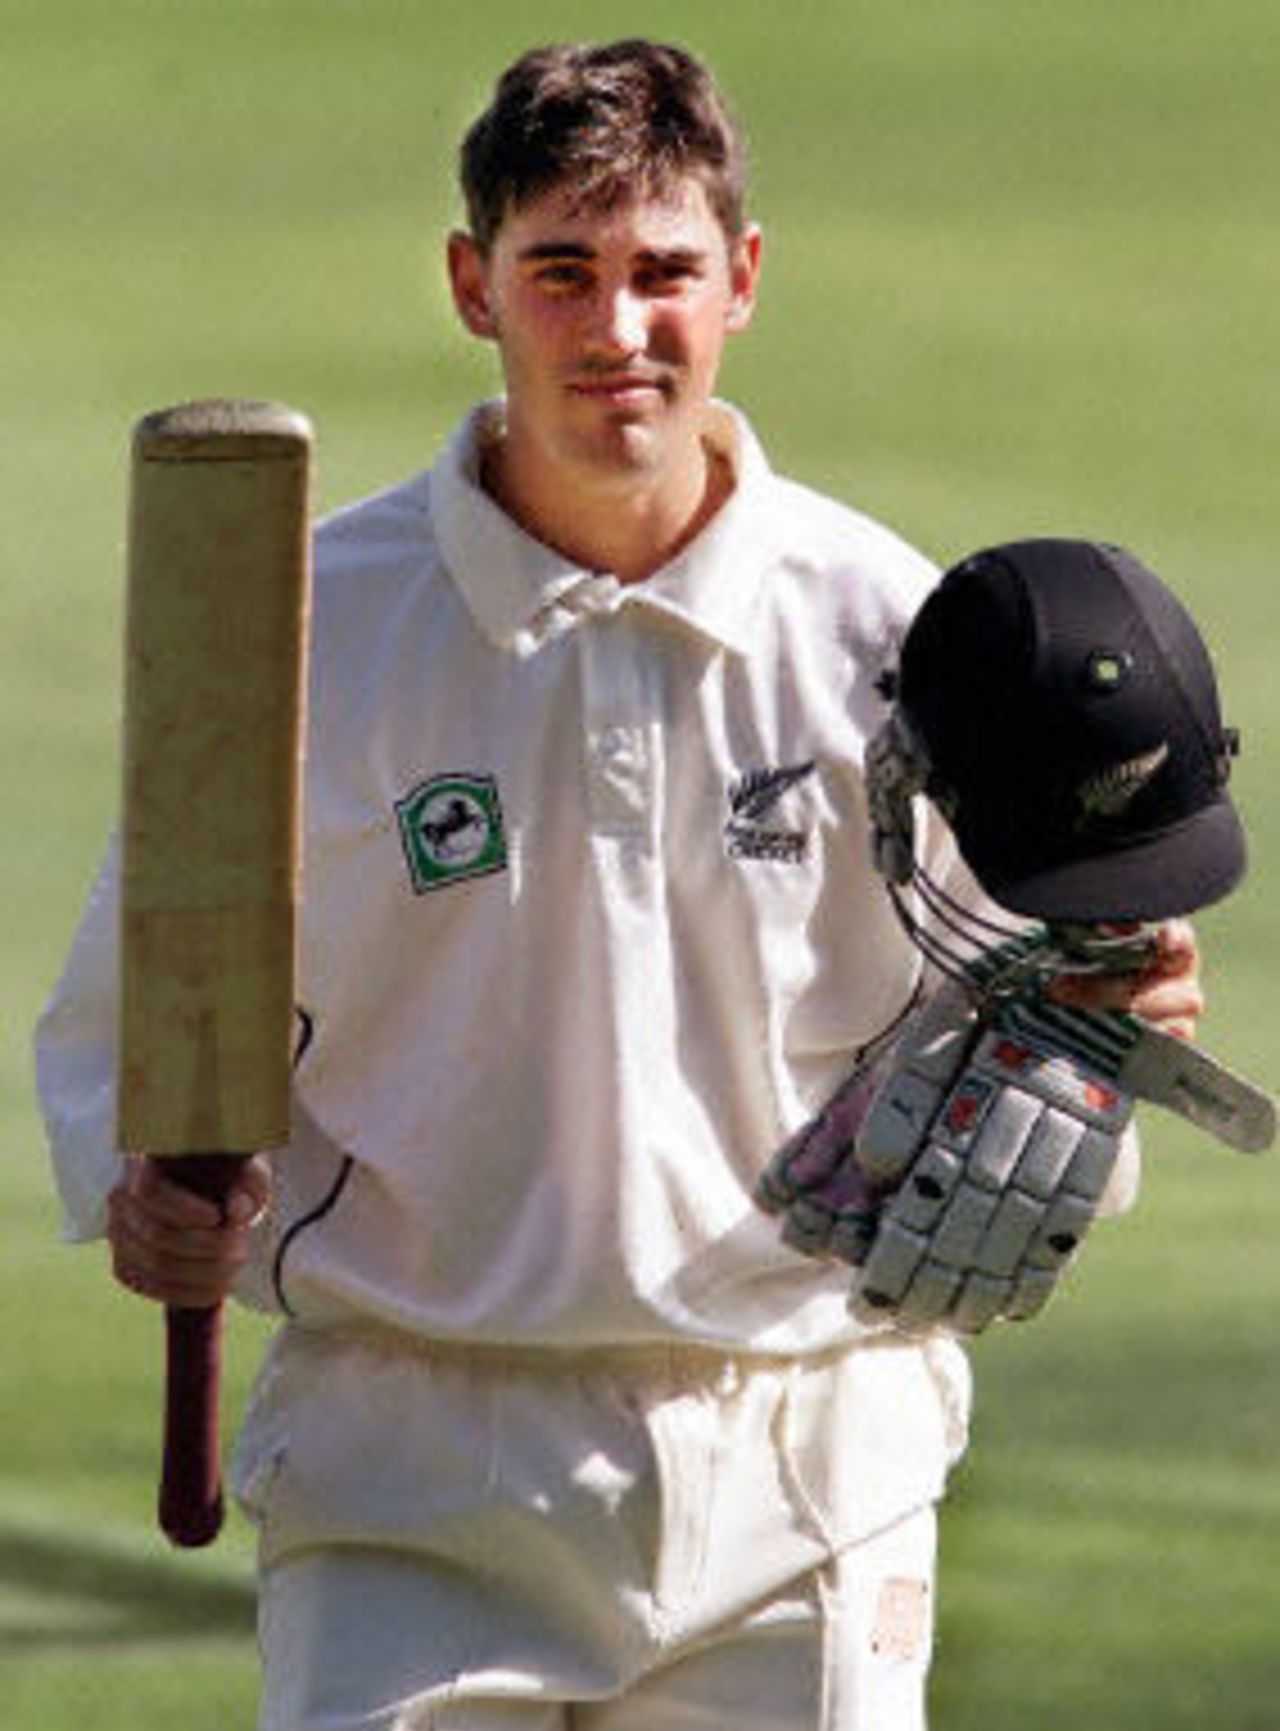 Mathew Sinclair acknowledges the applause after scoring a century, day 1, 2nd Test at Christchurch, 15-19 March 2001.